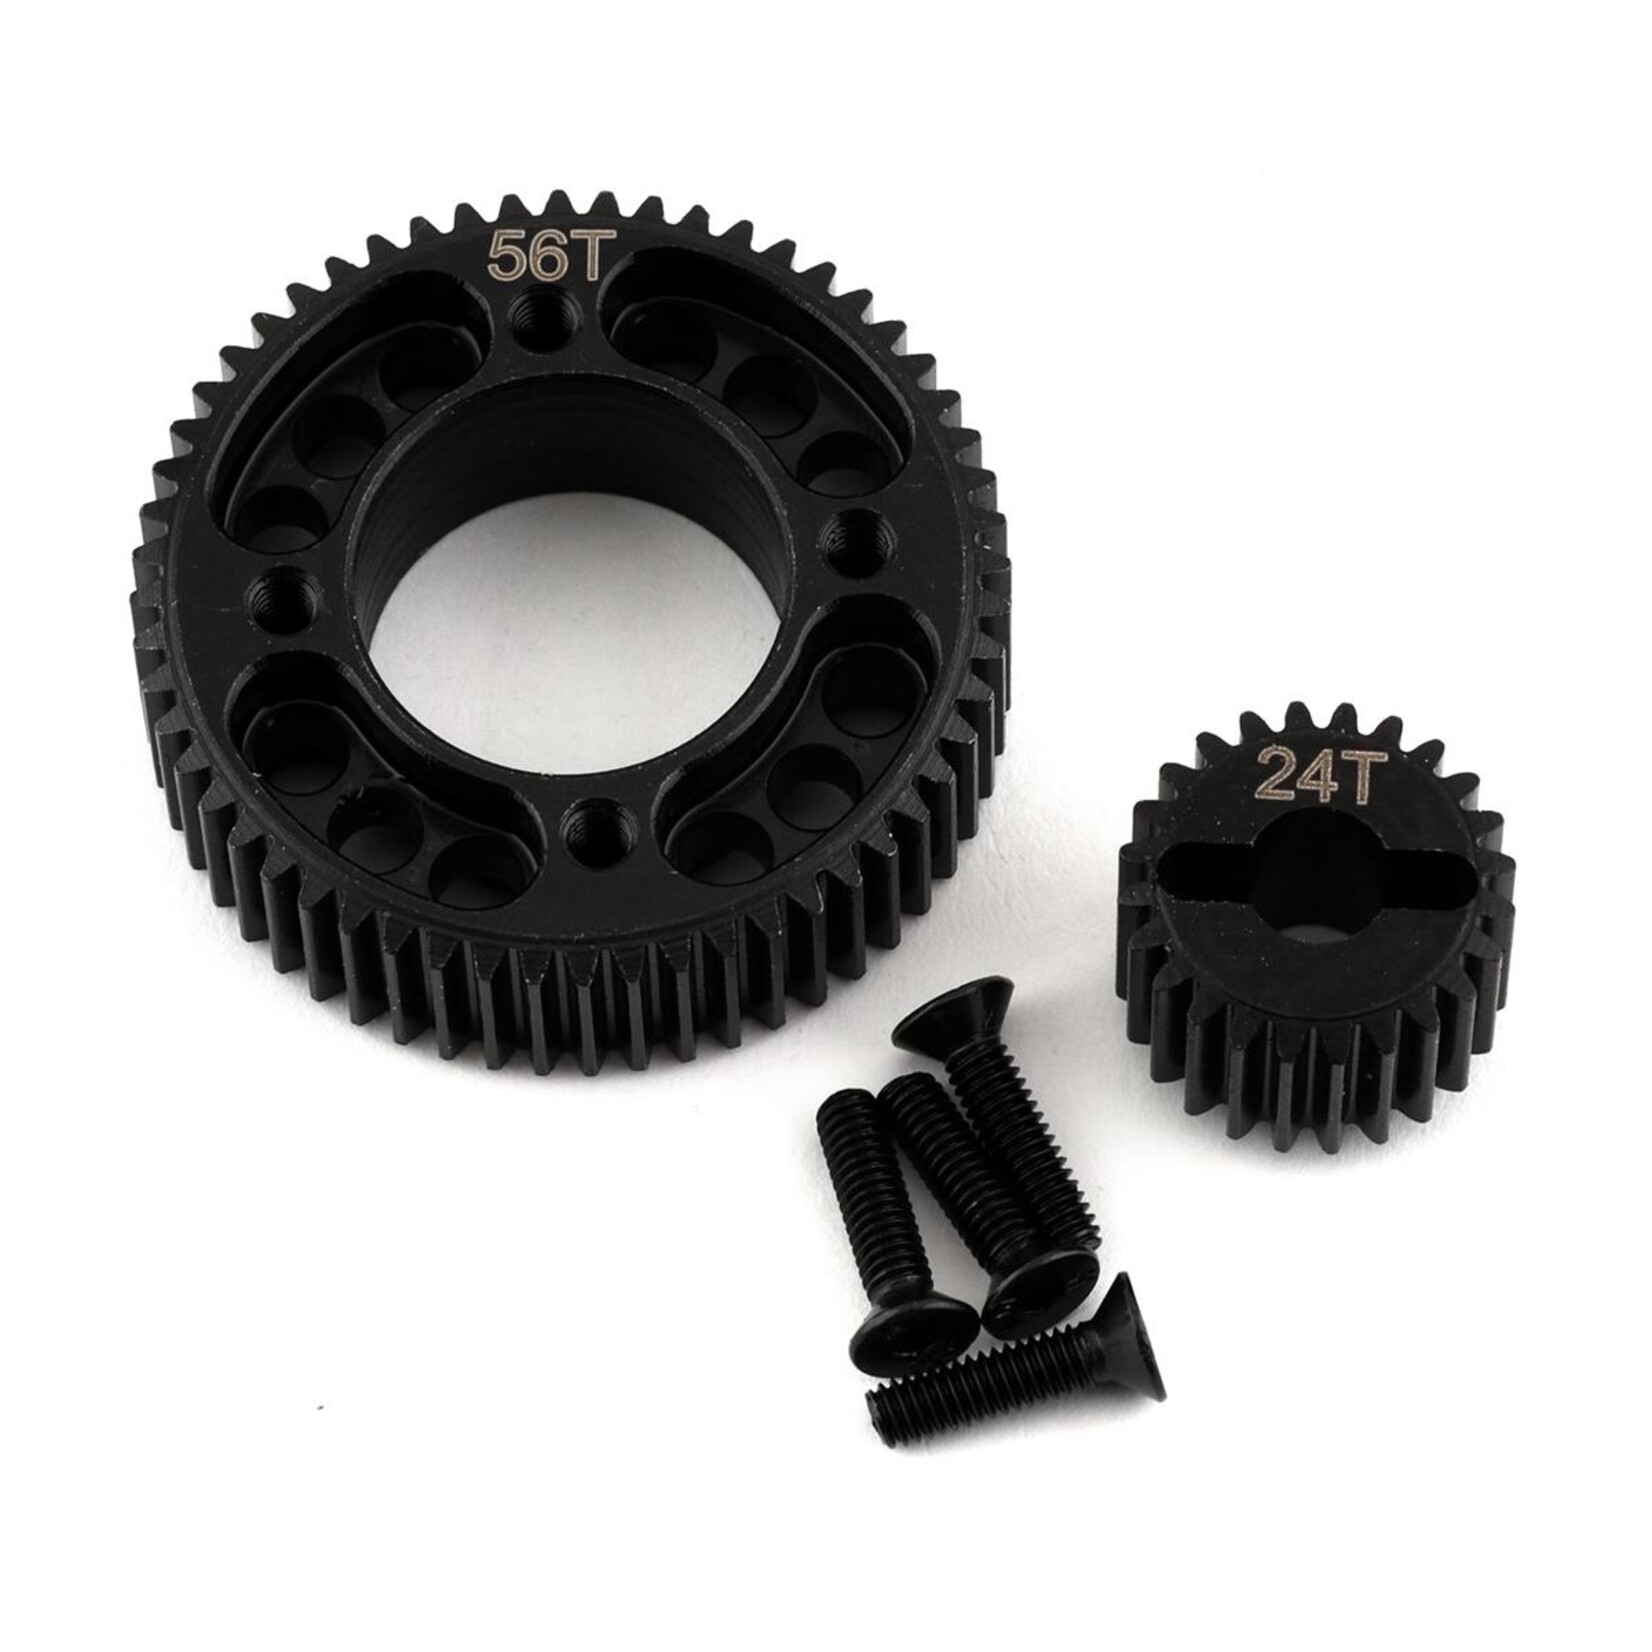 Hot Racing Hot Racing Enduro Stealth X UD2 Machined Underdrive Gear Set #EDR824X56